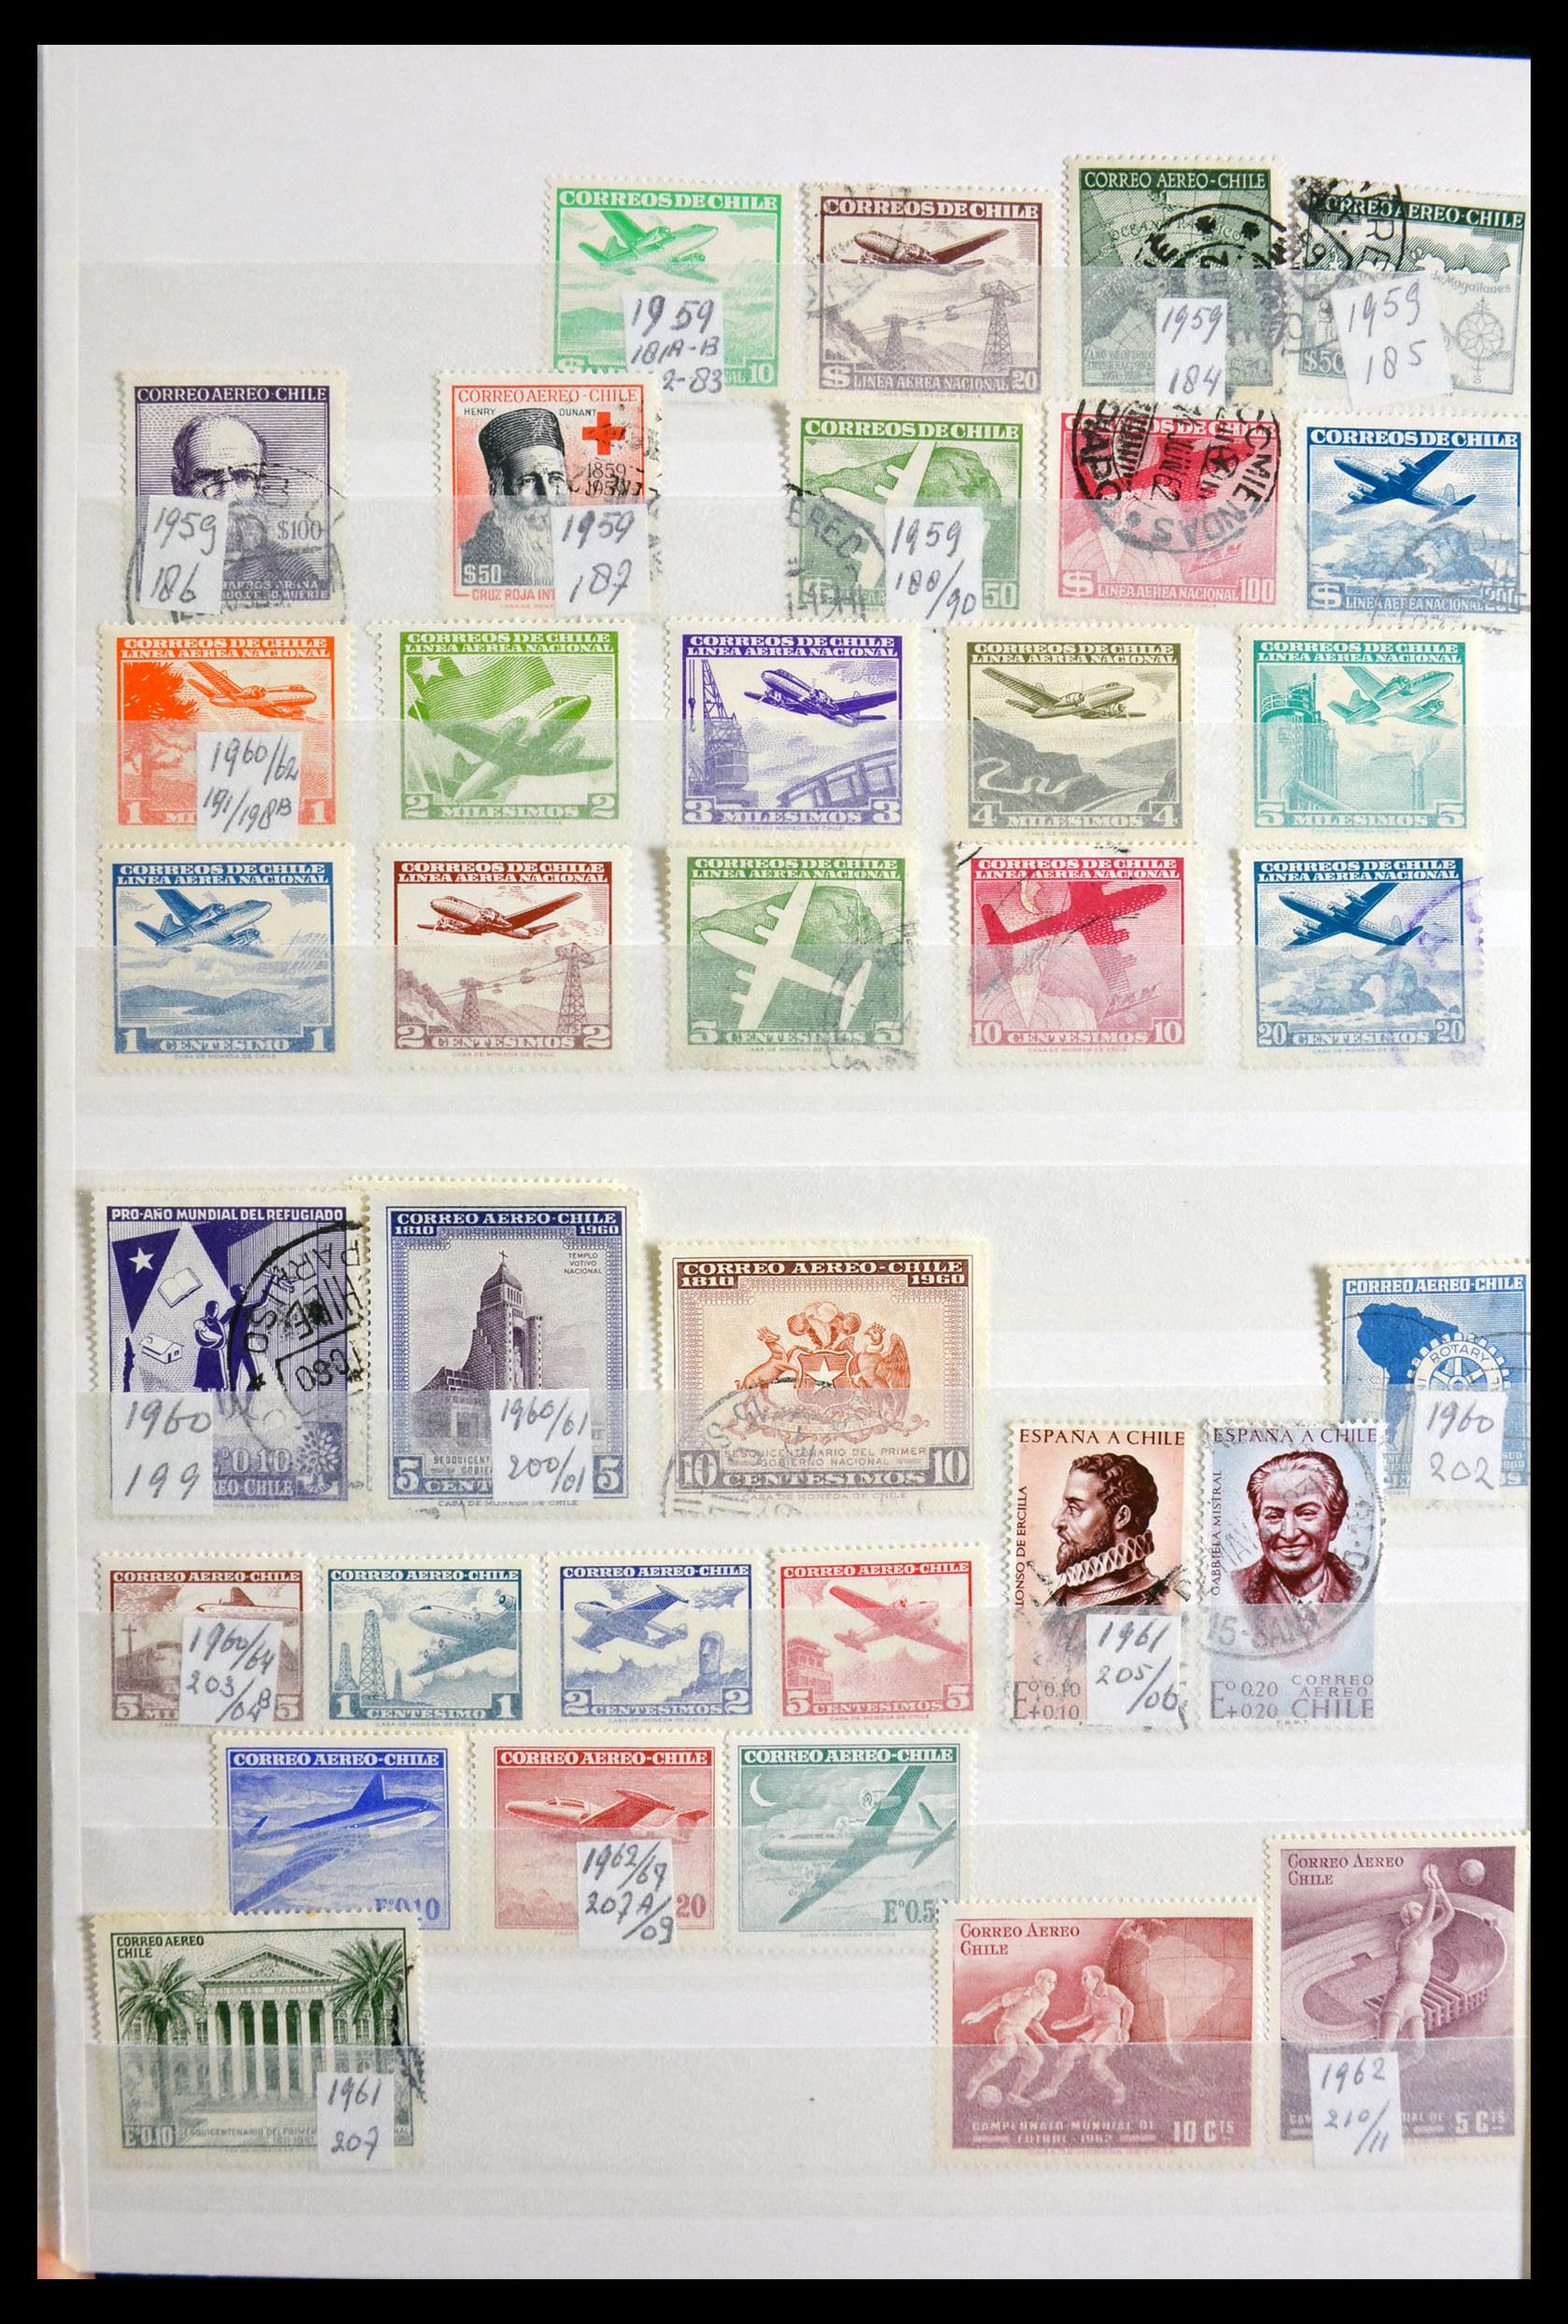 29917 038 - 29917 Latin America airmail stamps.